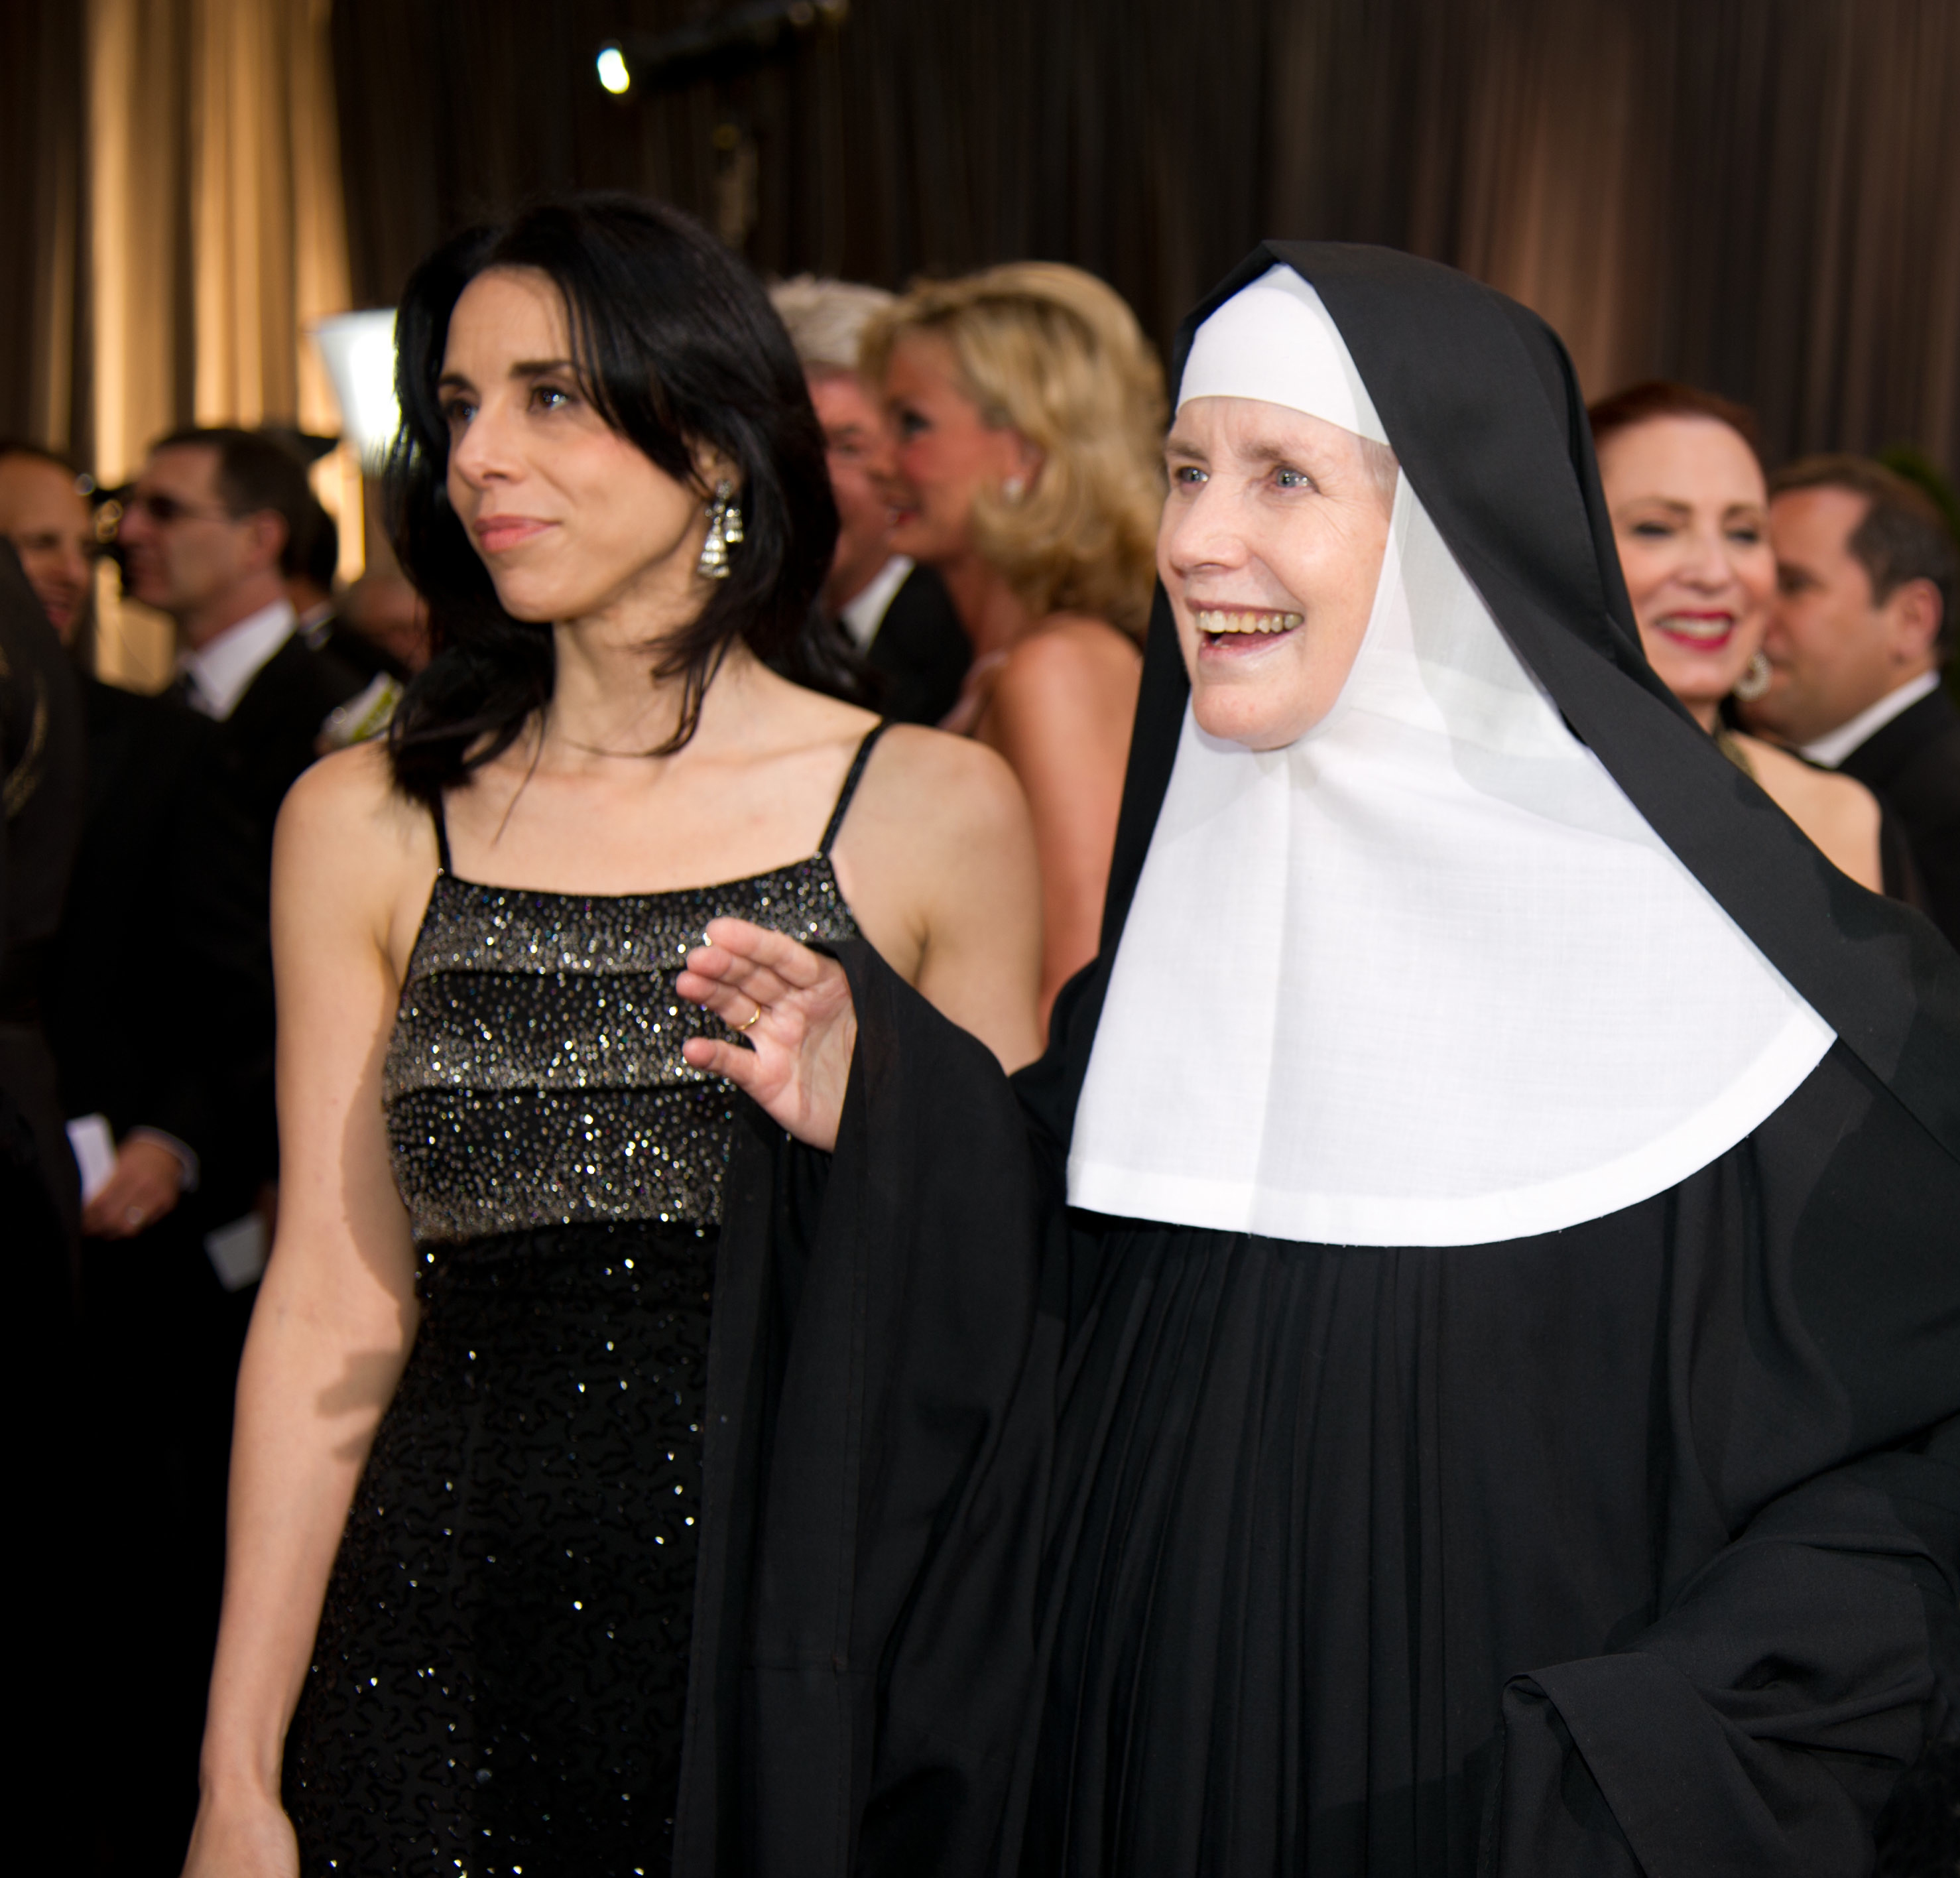 Rebecca Cammisa and Mother Prioress Dolores Hart on the Oscars Red Carpet.